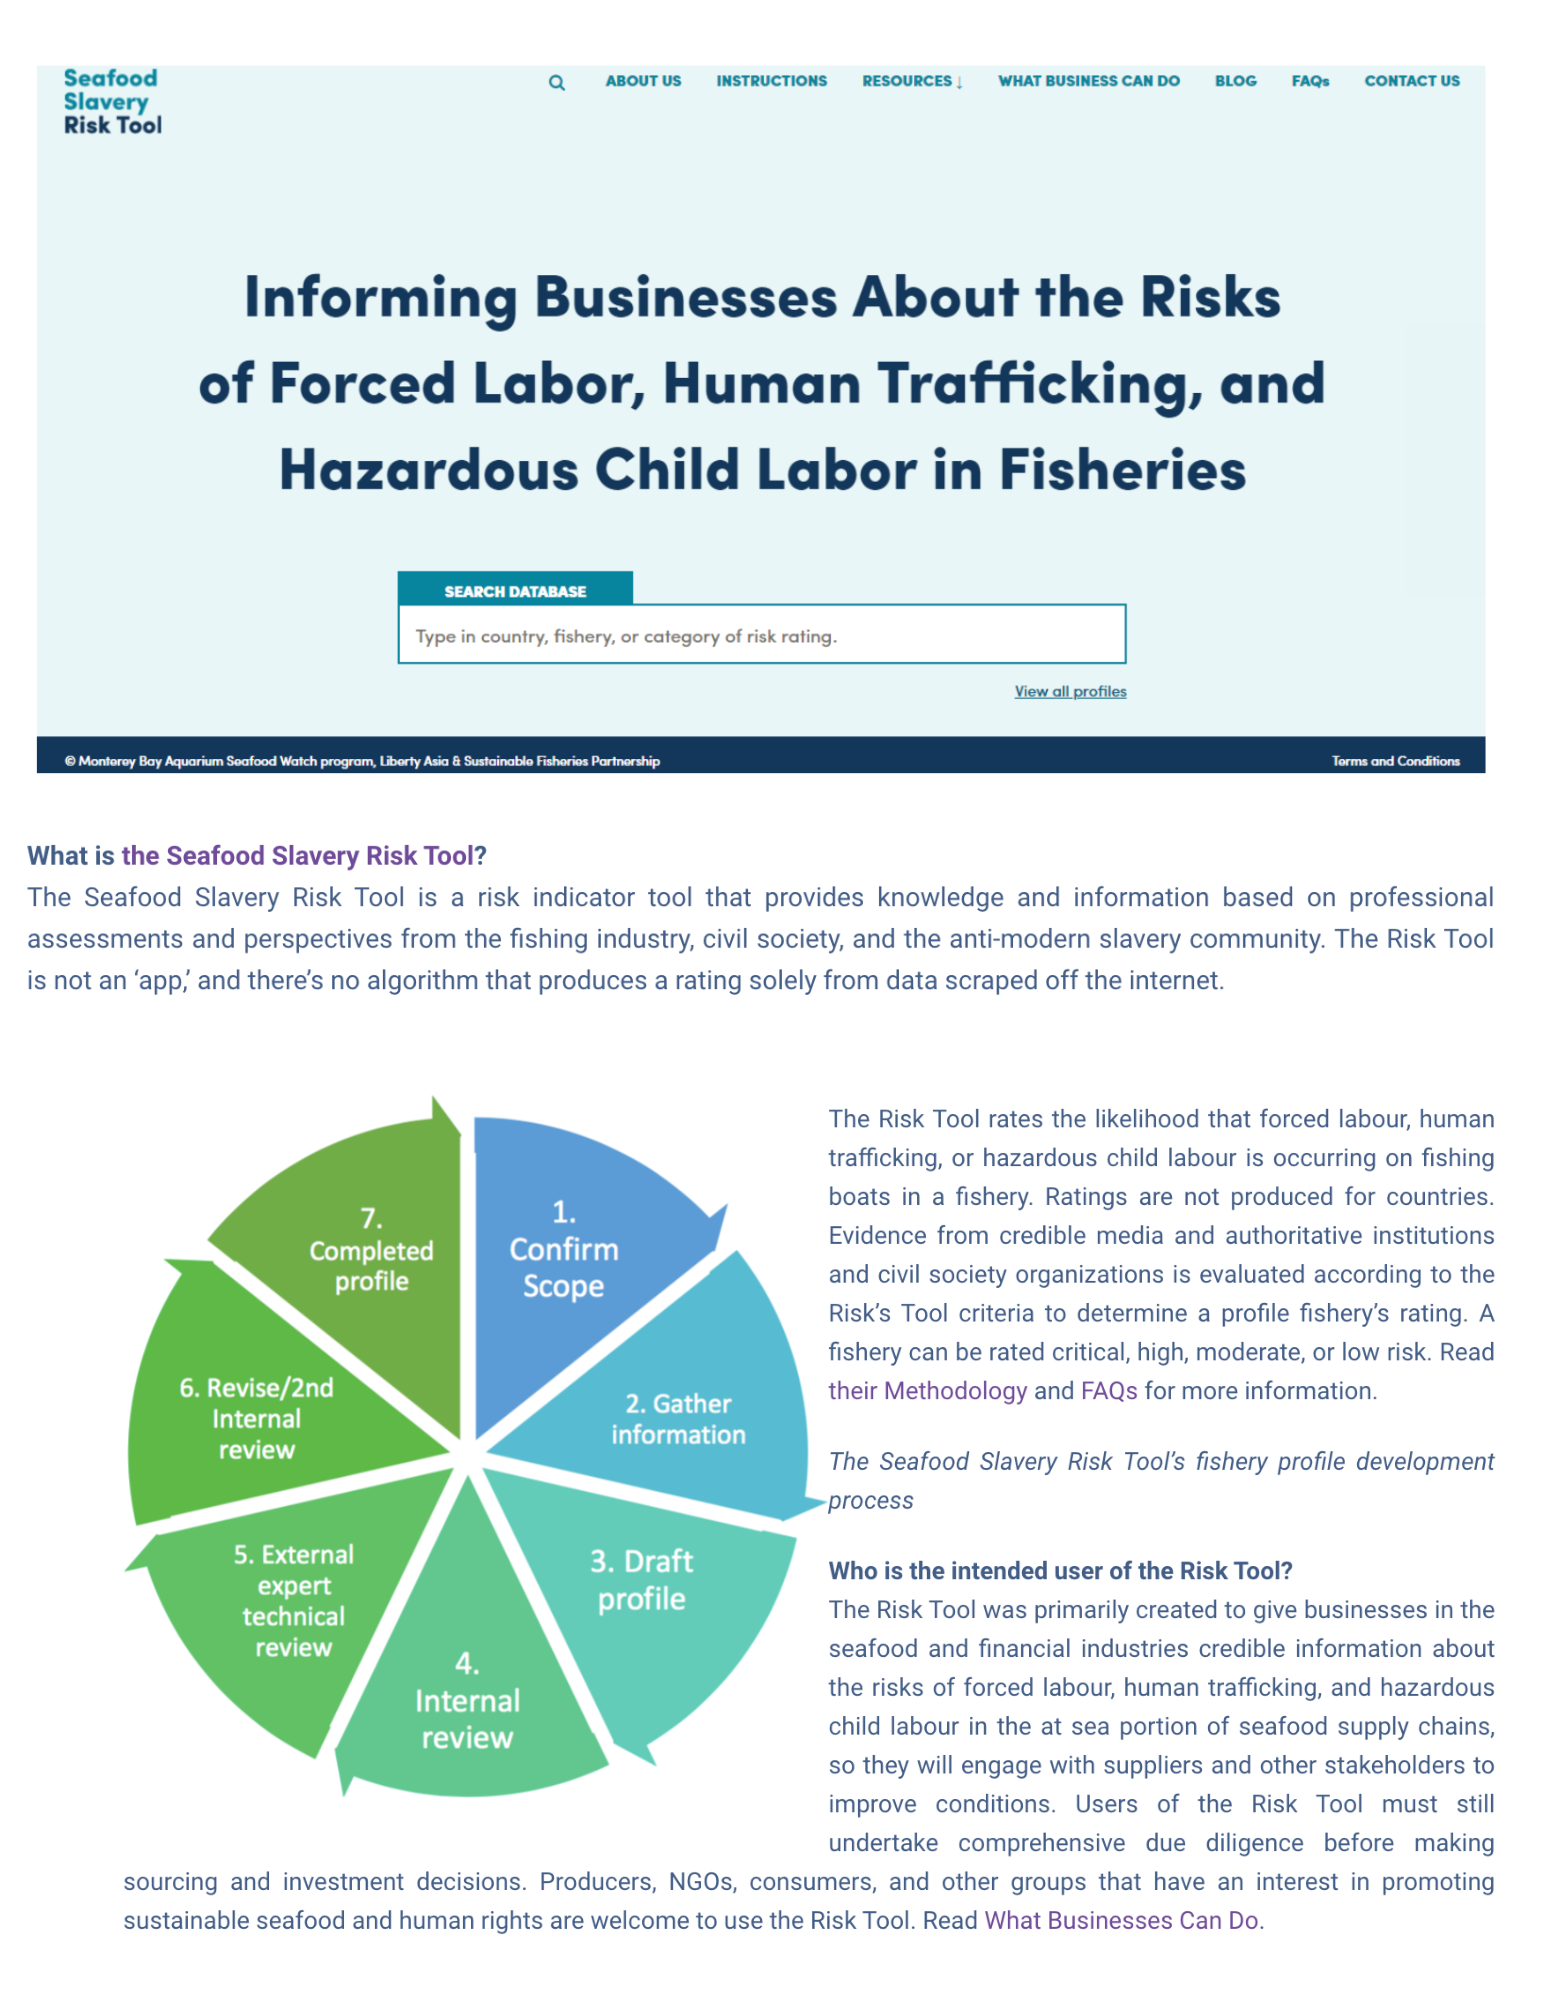 The Seafood Slavery Risk Tool is a Risk Indicator Tool